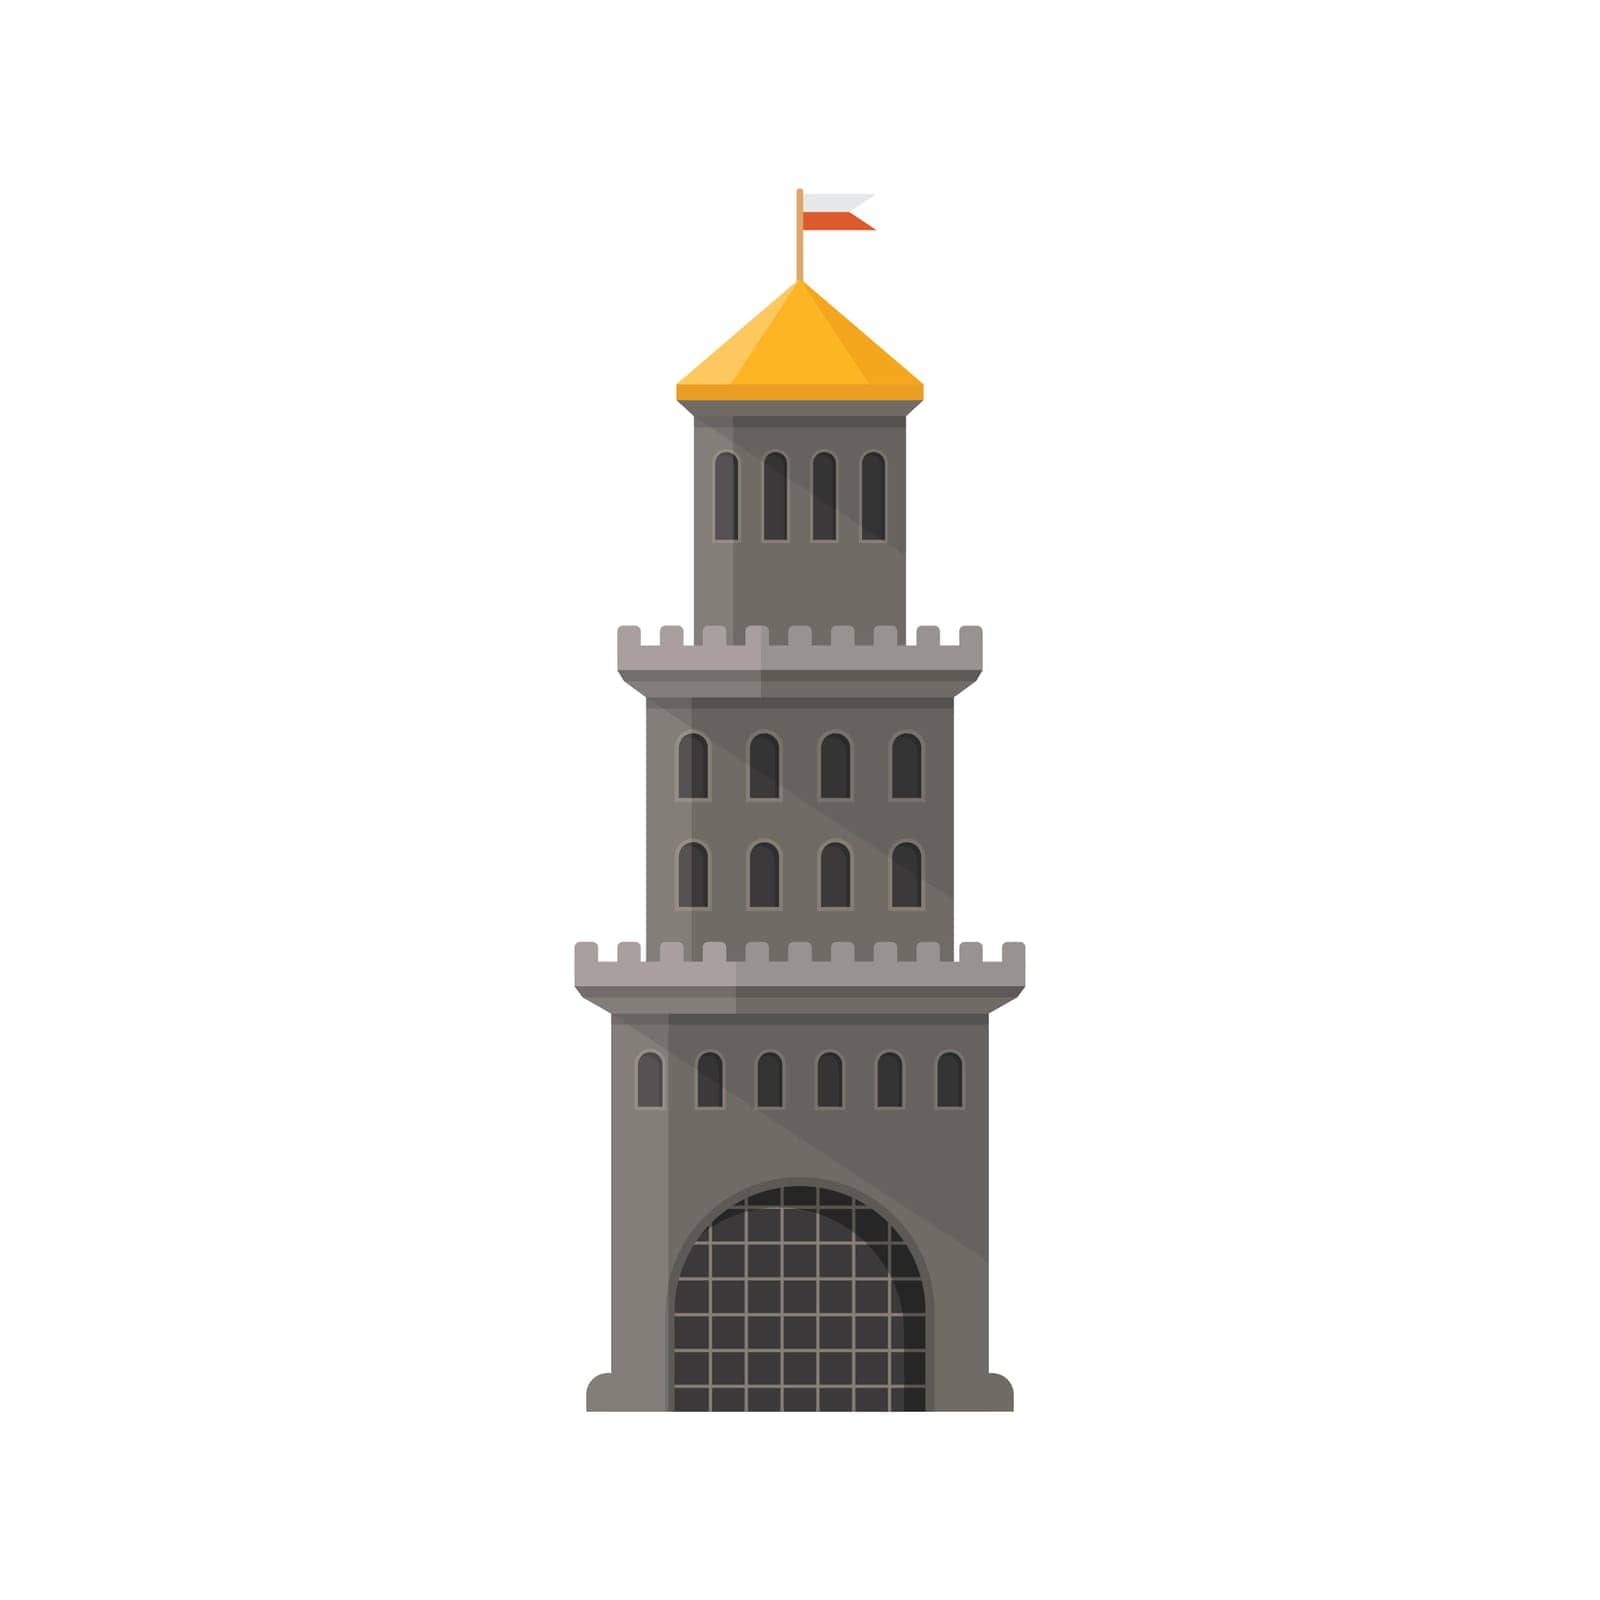 Castle tower icon in flat style. Medieval citadel vector illustration on isolated background. Stronghold building sign business concept. by LysenkoA